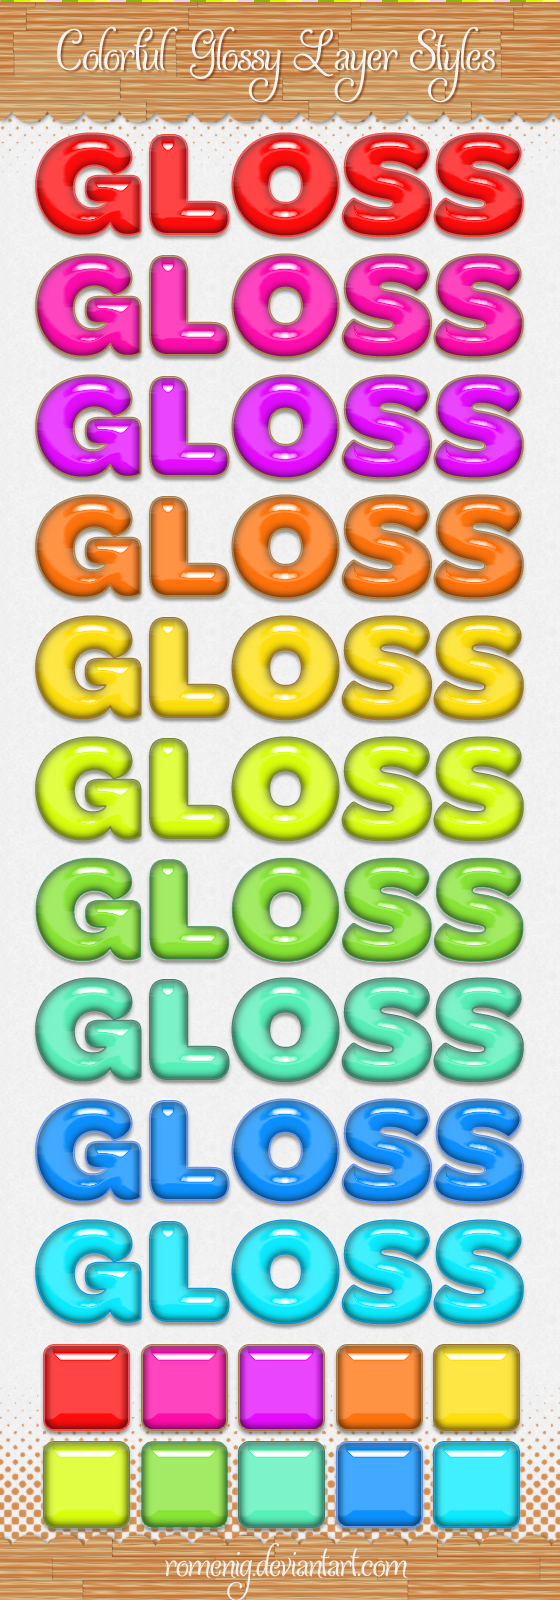 Colorful Gloss Layer Styles